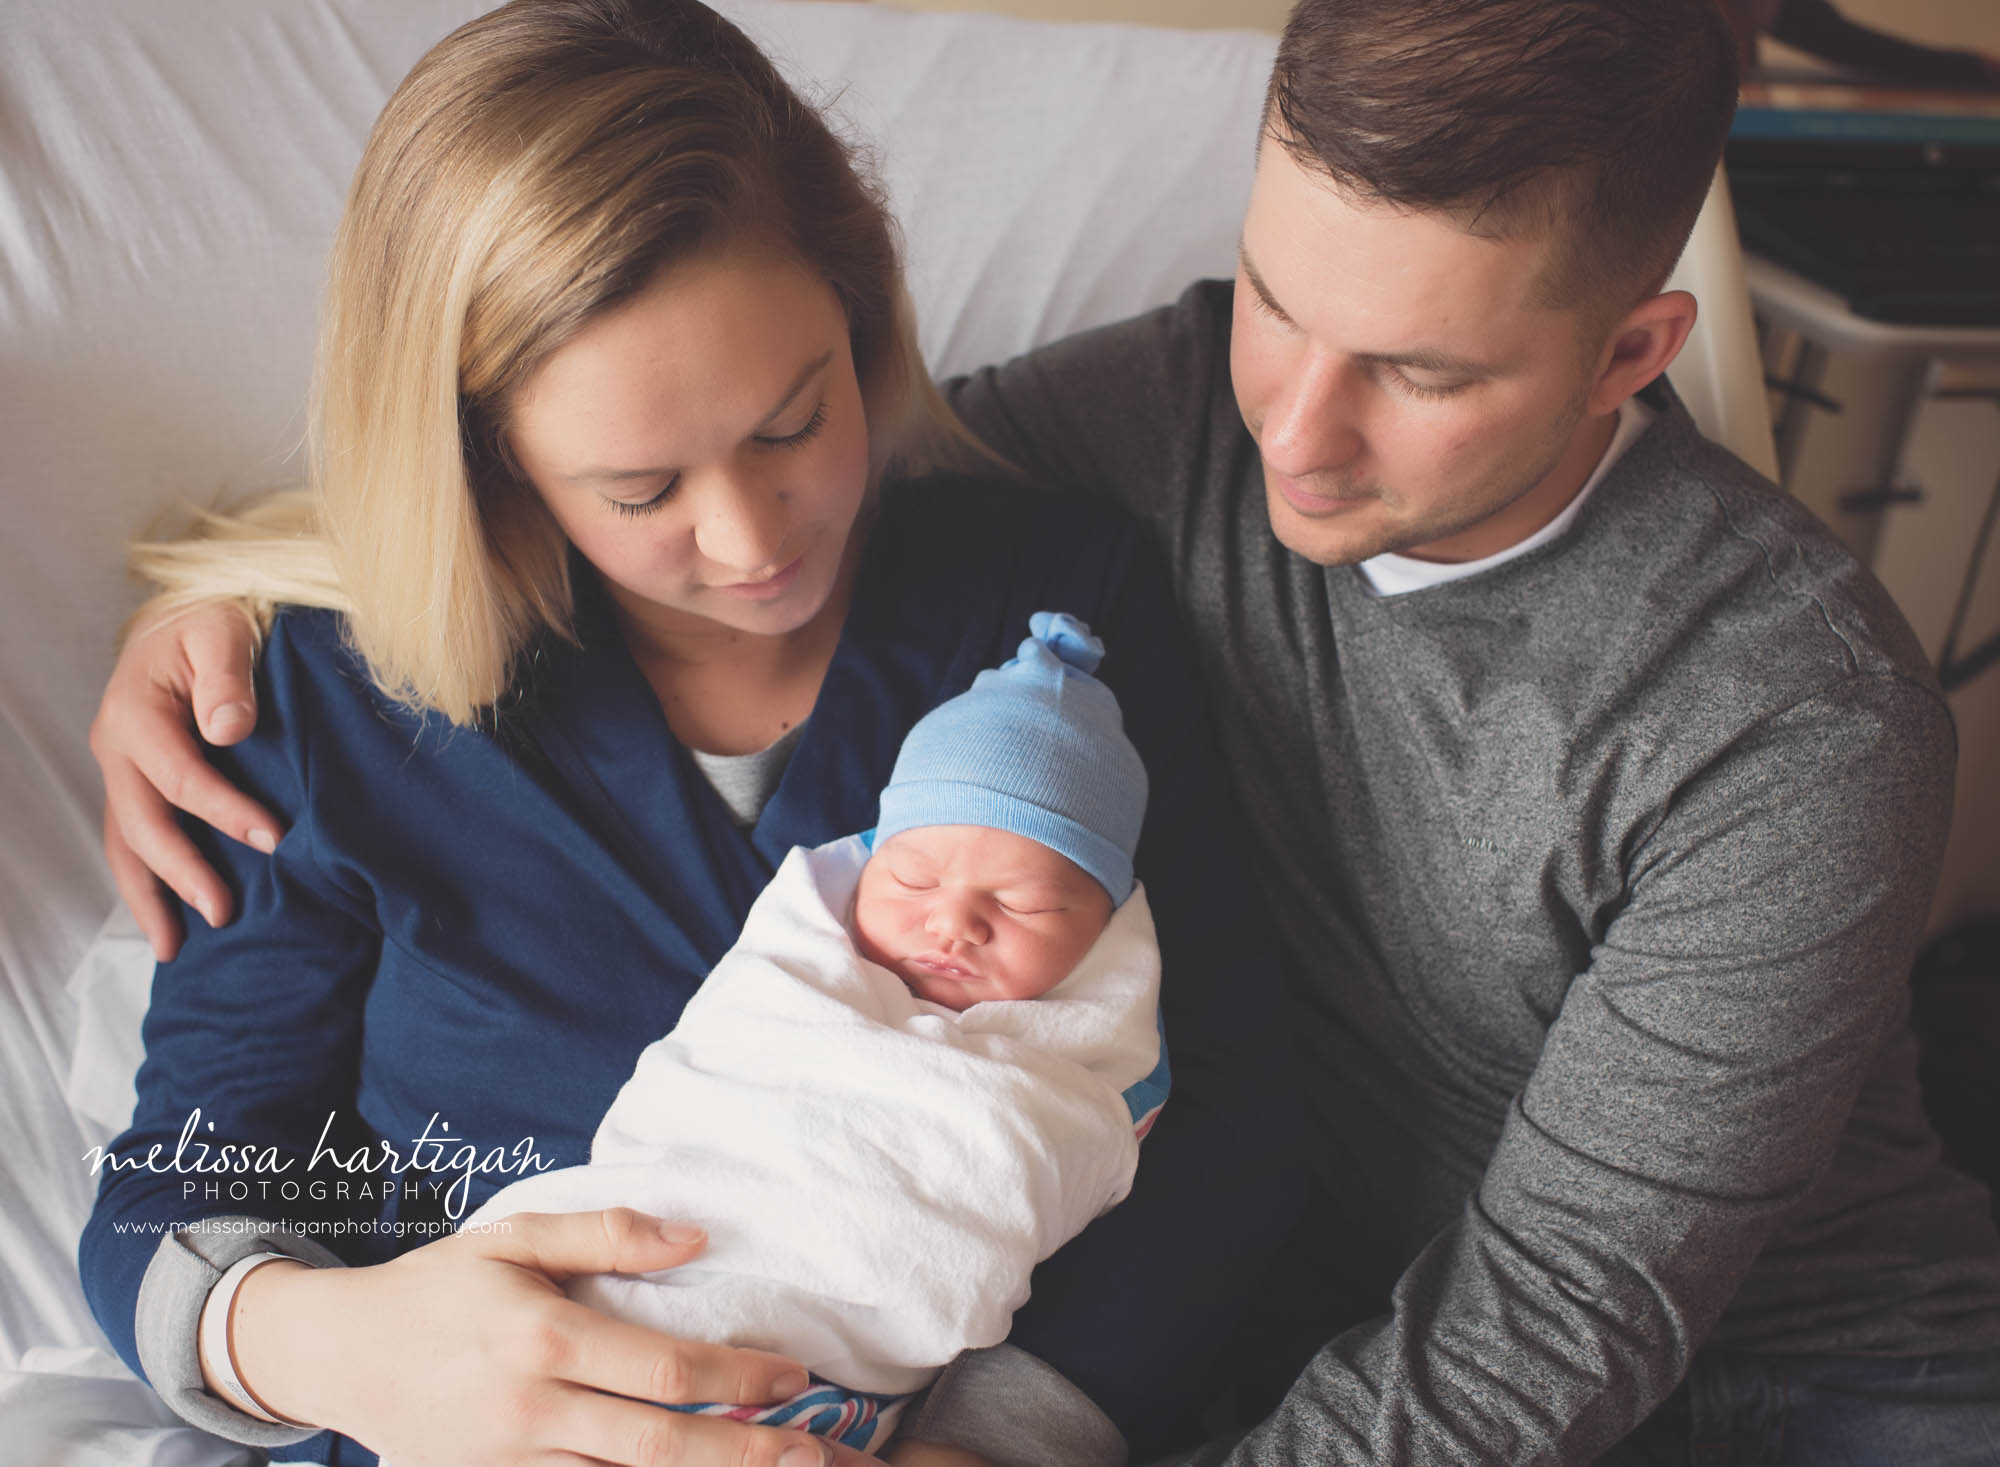 new parents holding their baby boy sitting on hospital bed